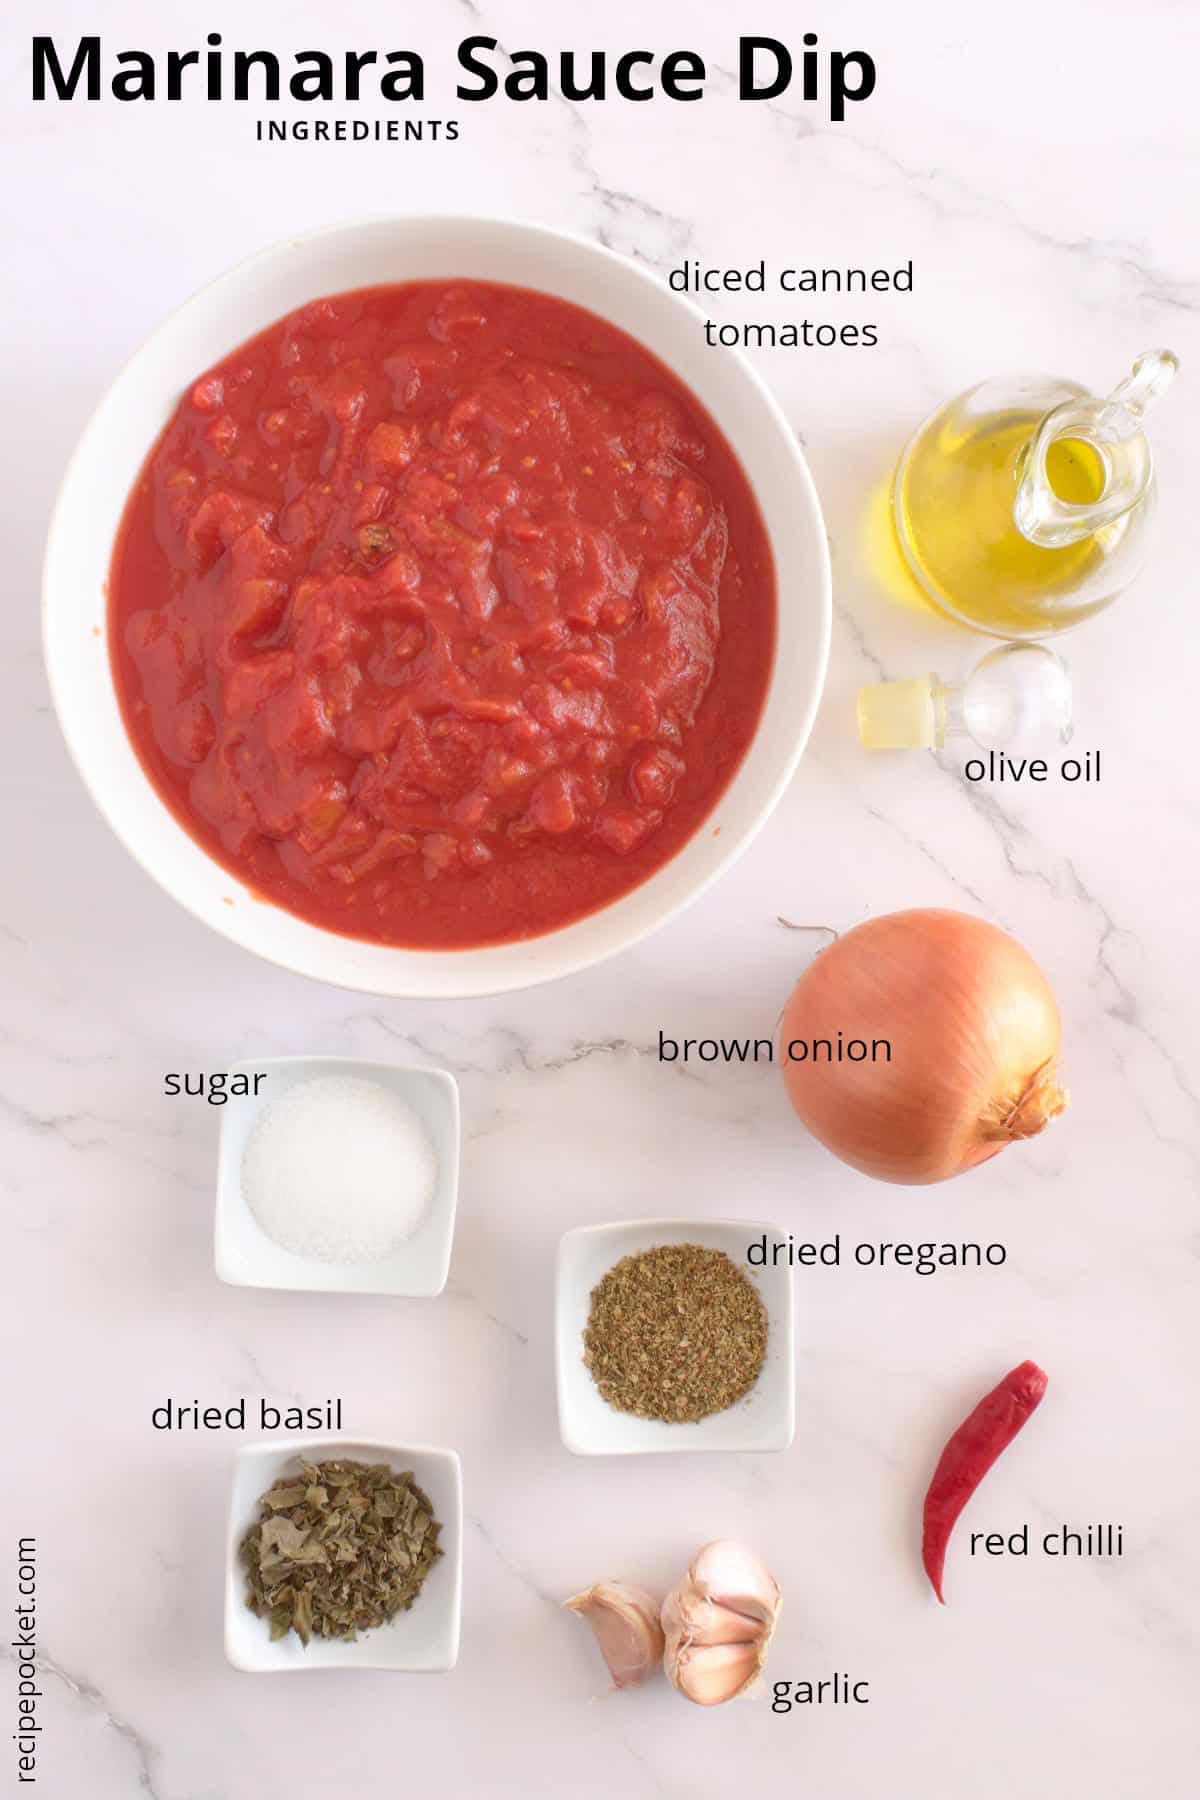 Image for ingredients for marinara dipping sauce.